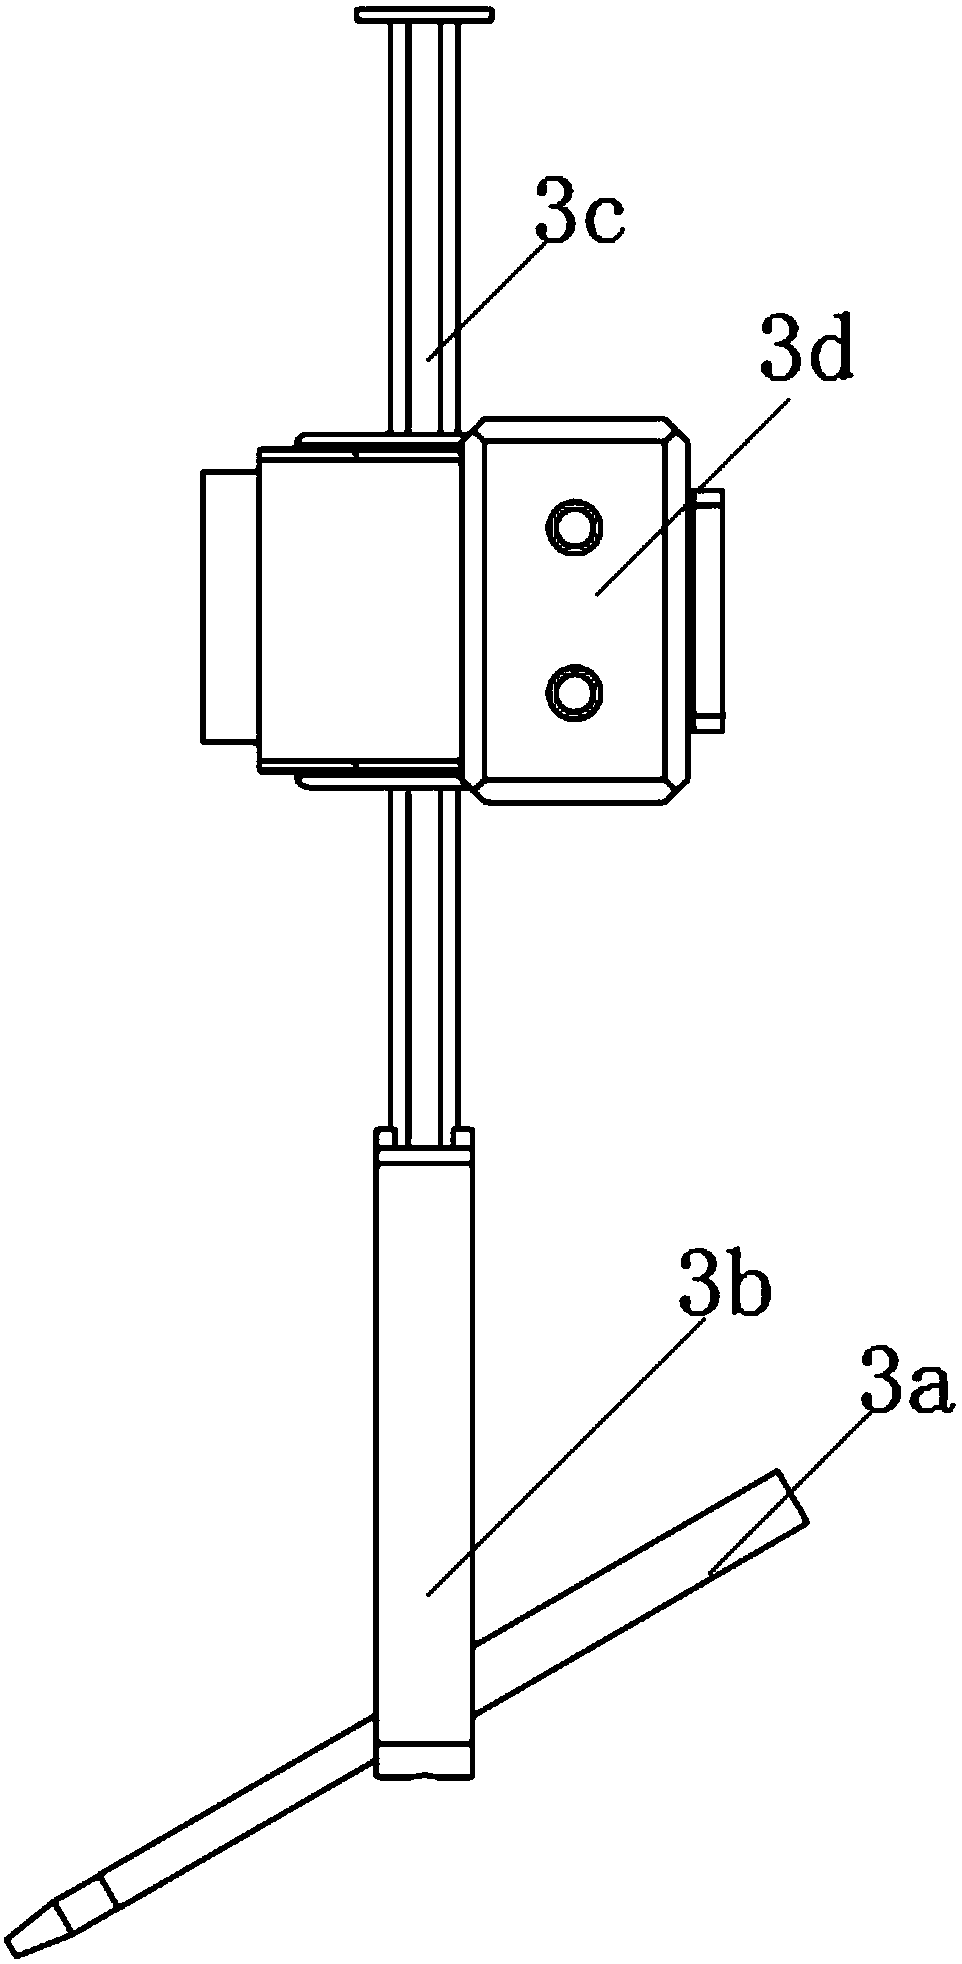 A wire feeding system for a welding machine head